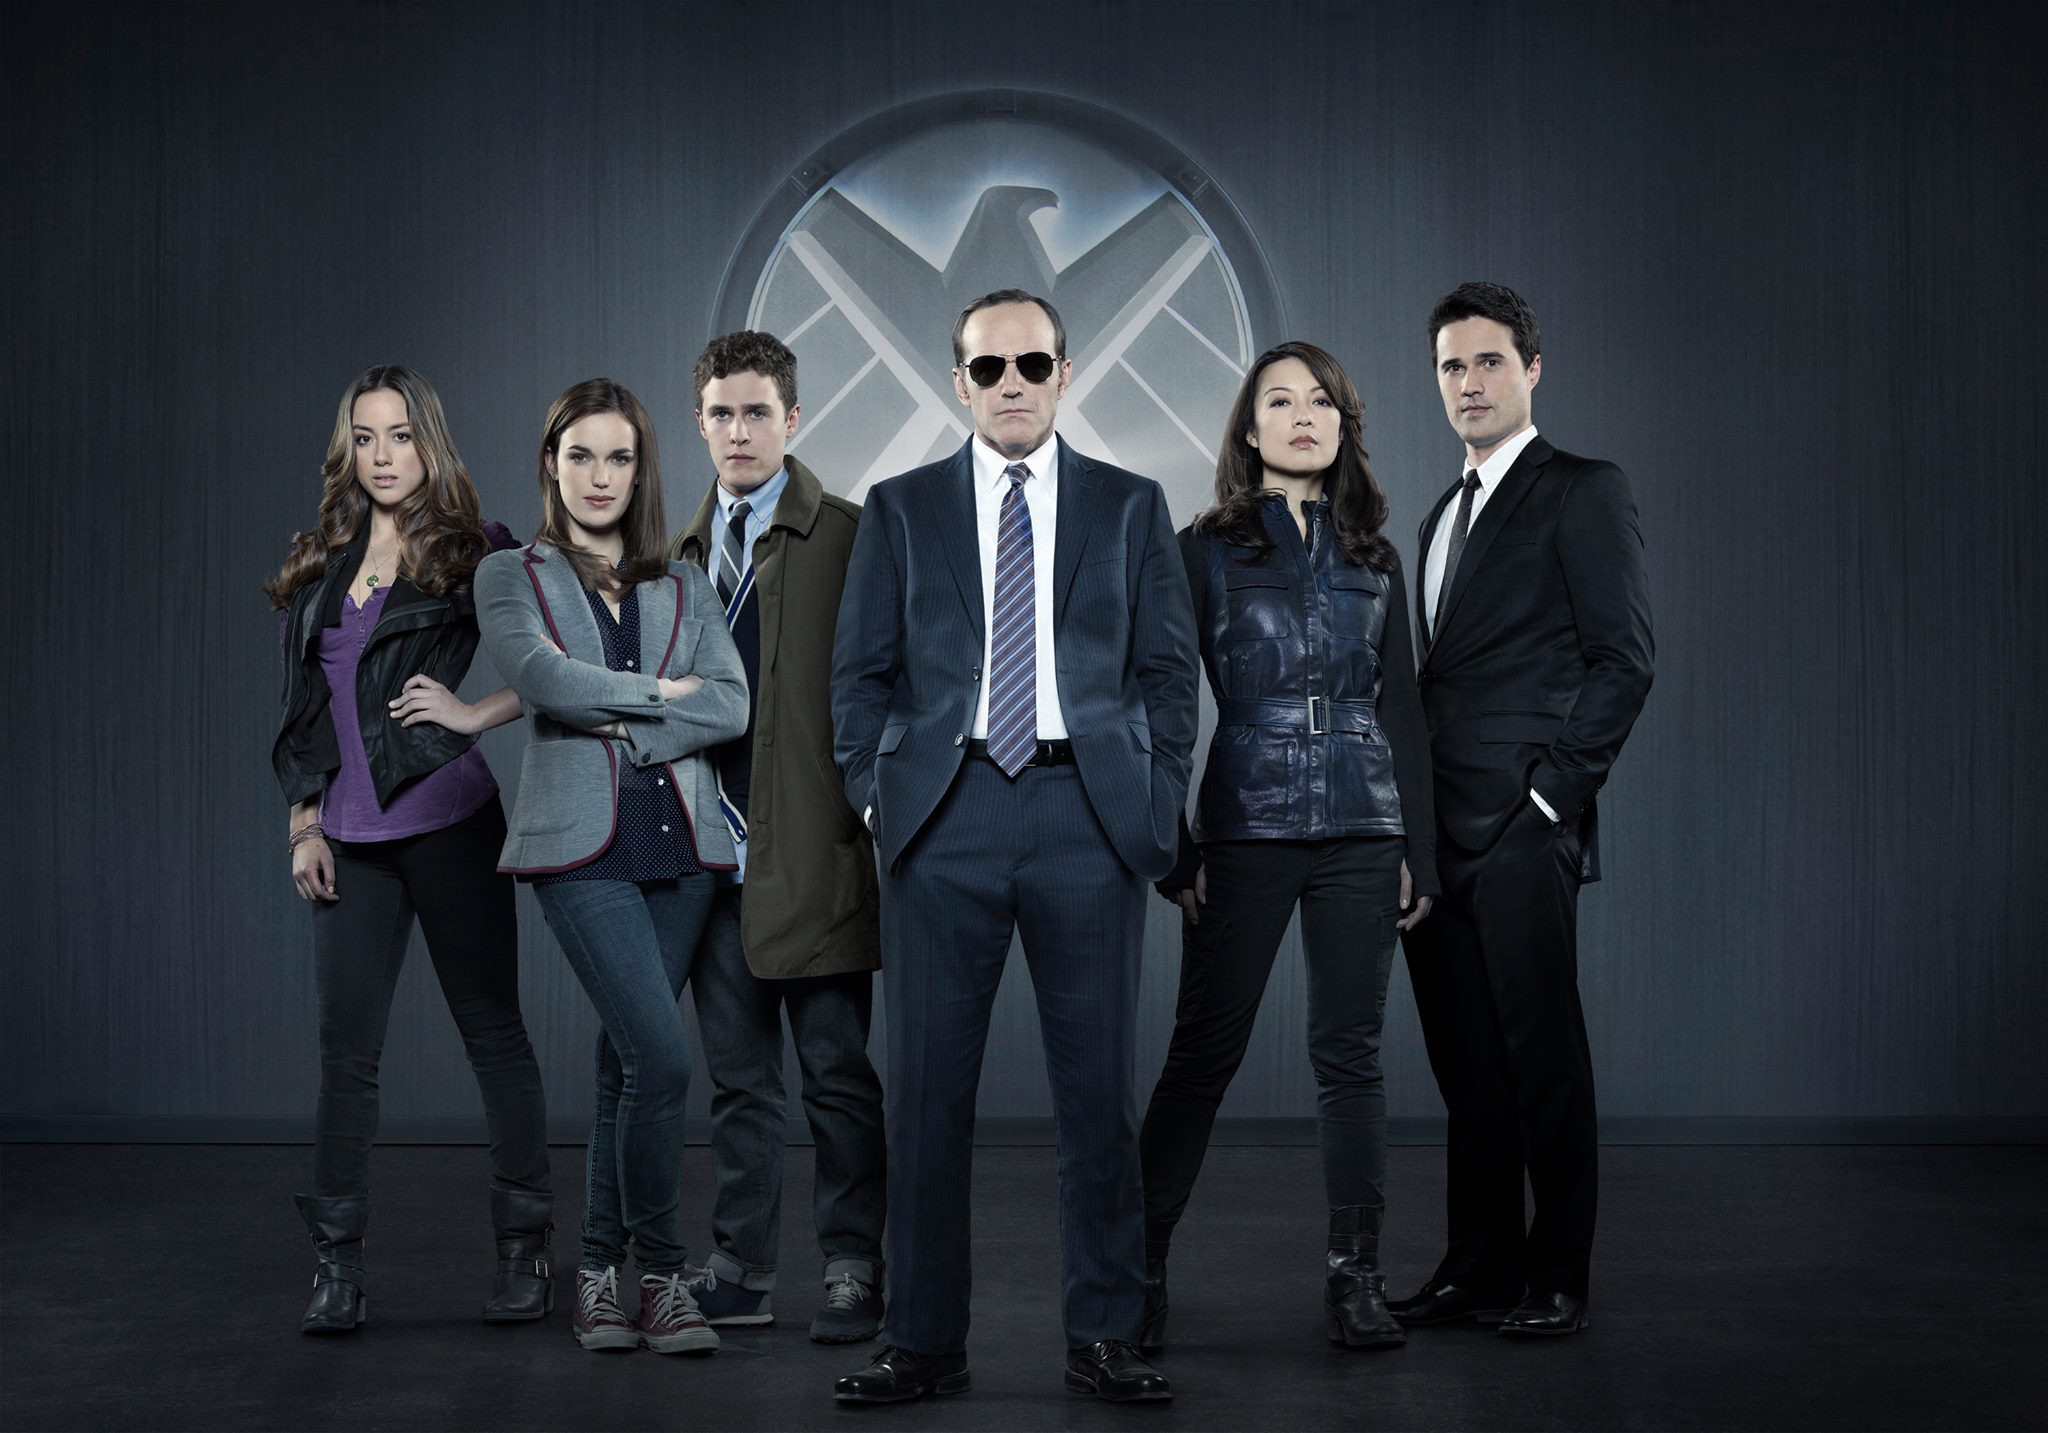 Geek insider, geekinsider, geekinsider. Com,, agents of s. H. I. E. L. D. Season 2 date announced, entertainment, tv and movies